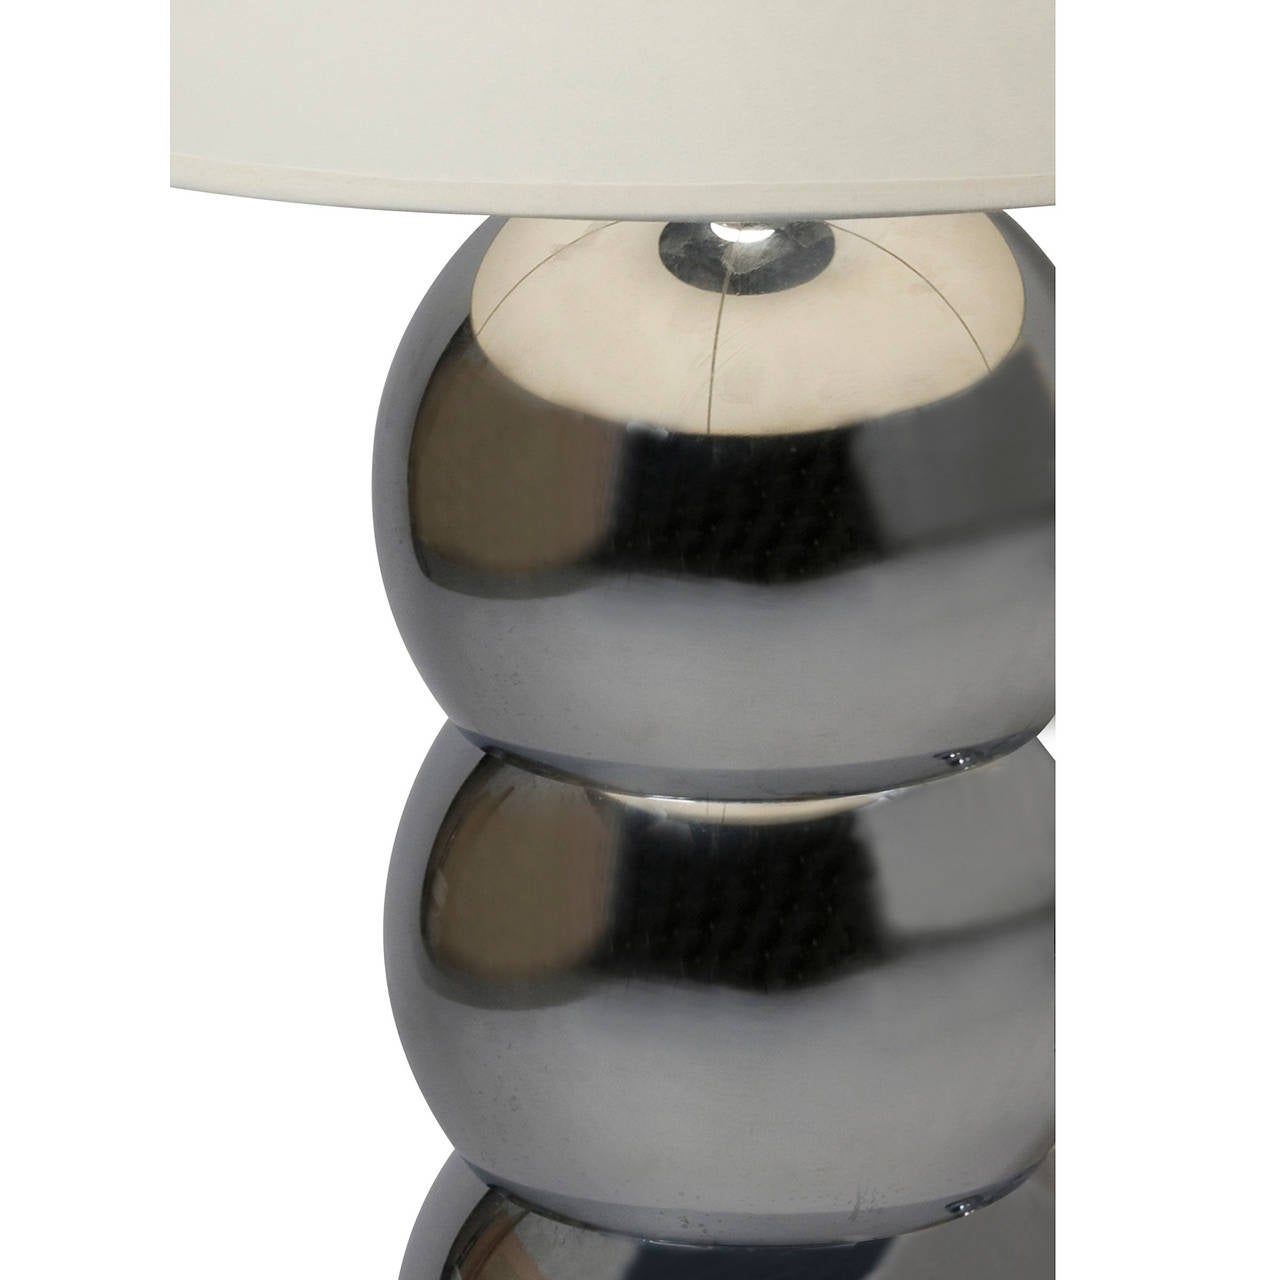 Pair of chrome stacked sphere table lamps, with ebonized wood bases. American, 1960s. In custom paper shades. Overall height 36 1/2 in, shade top diameter 14 in, bottom diameter 18 in, shade slant height 15 in, base diameter 7 in. (Item